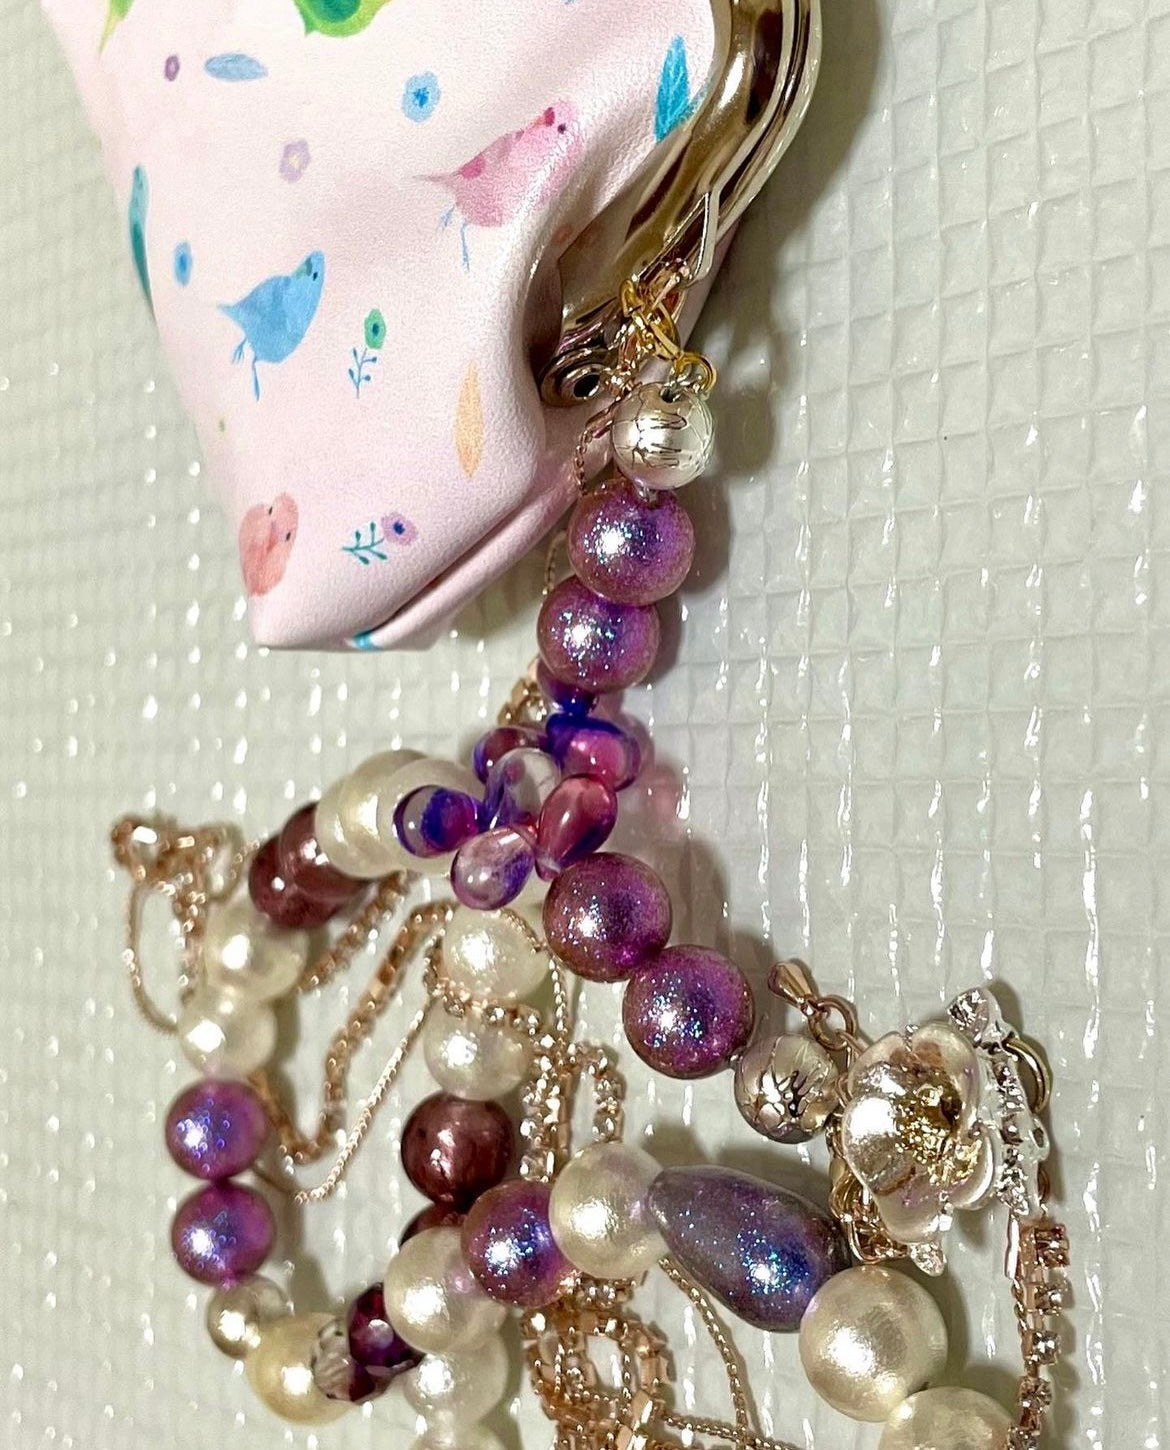 Beads-pearls-chain multi-use holder cum necklace